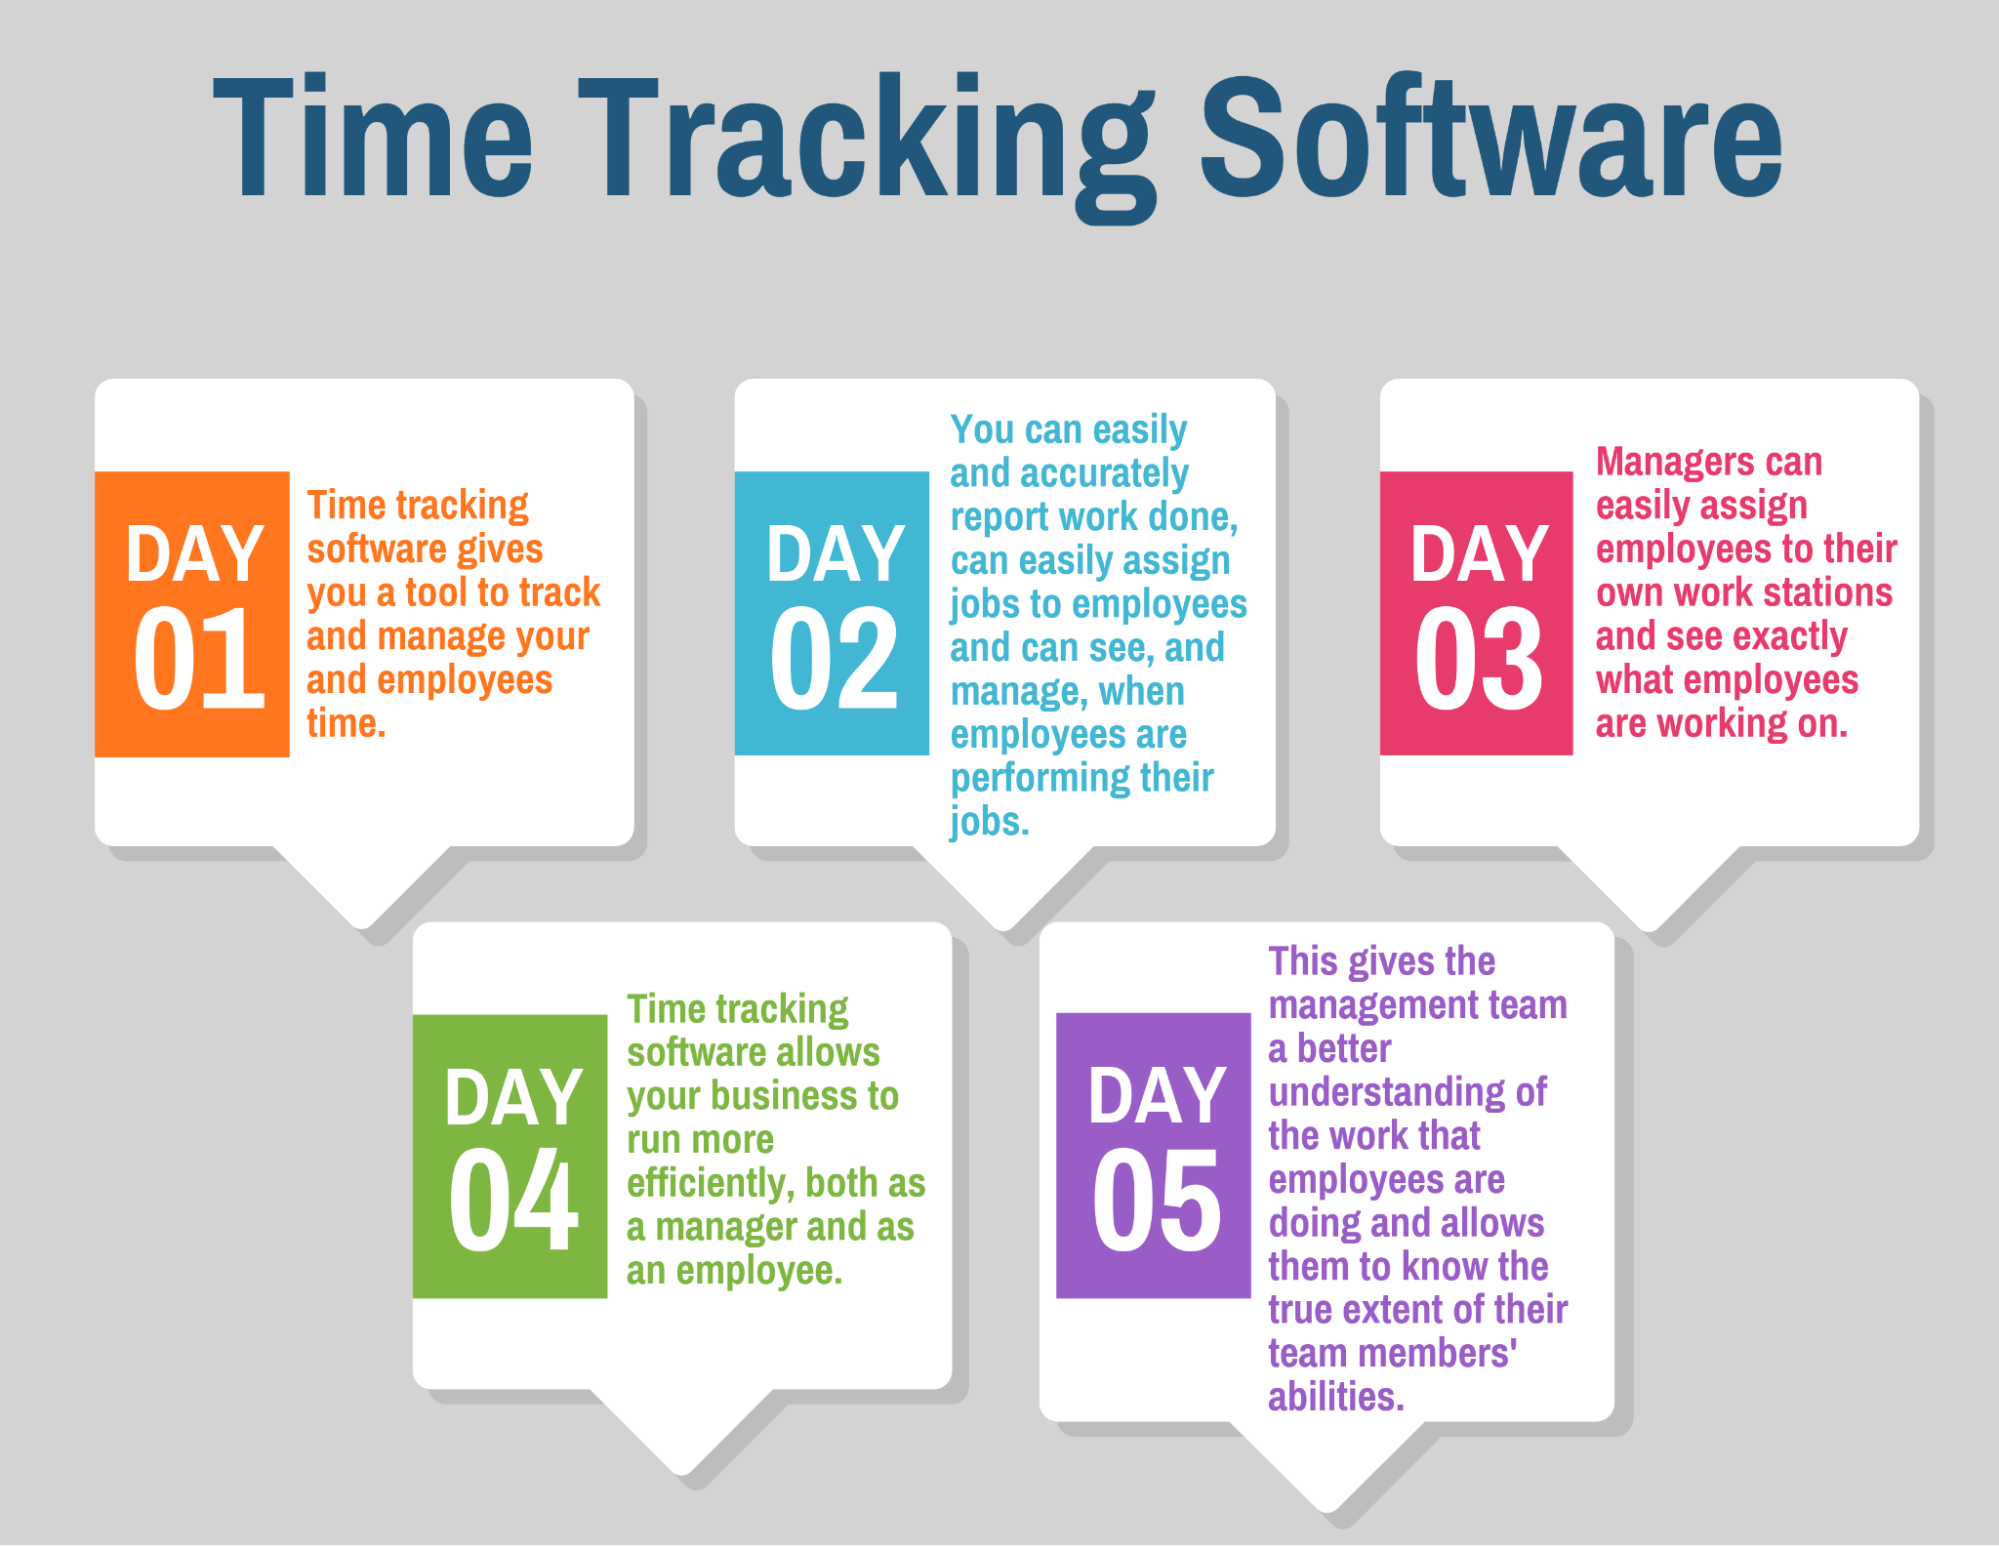 How Time Tracking Software Improves Employee Productivity?